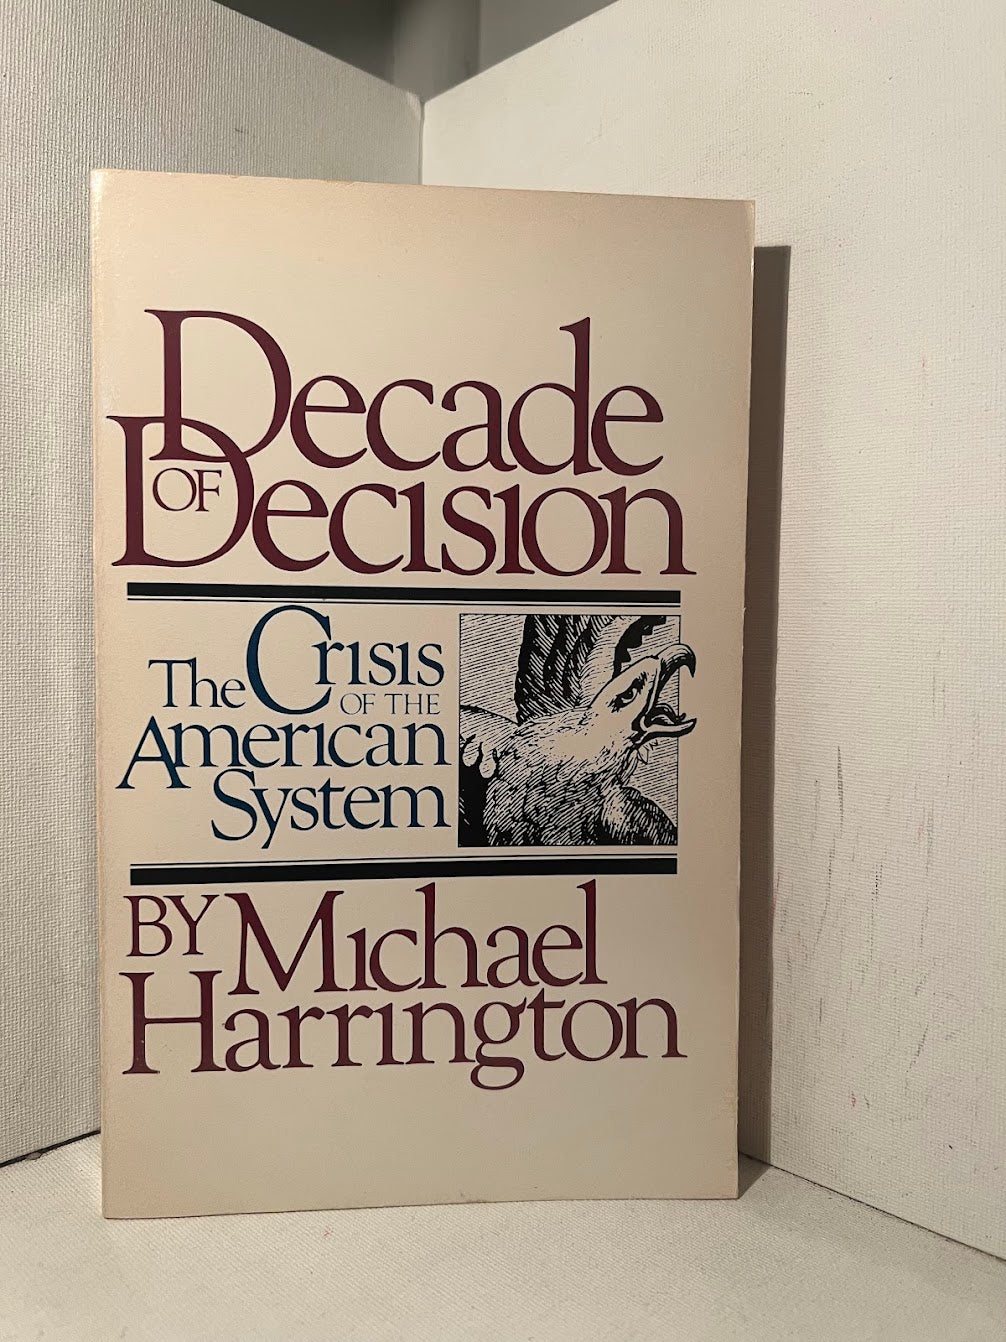 Decade of Decision: The Crisis of the American System by Michael Harrington